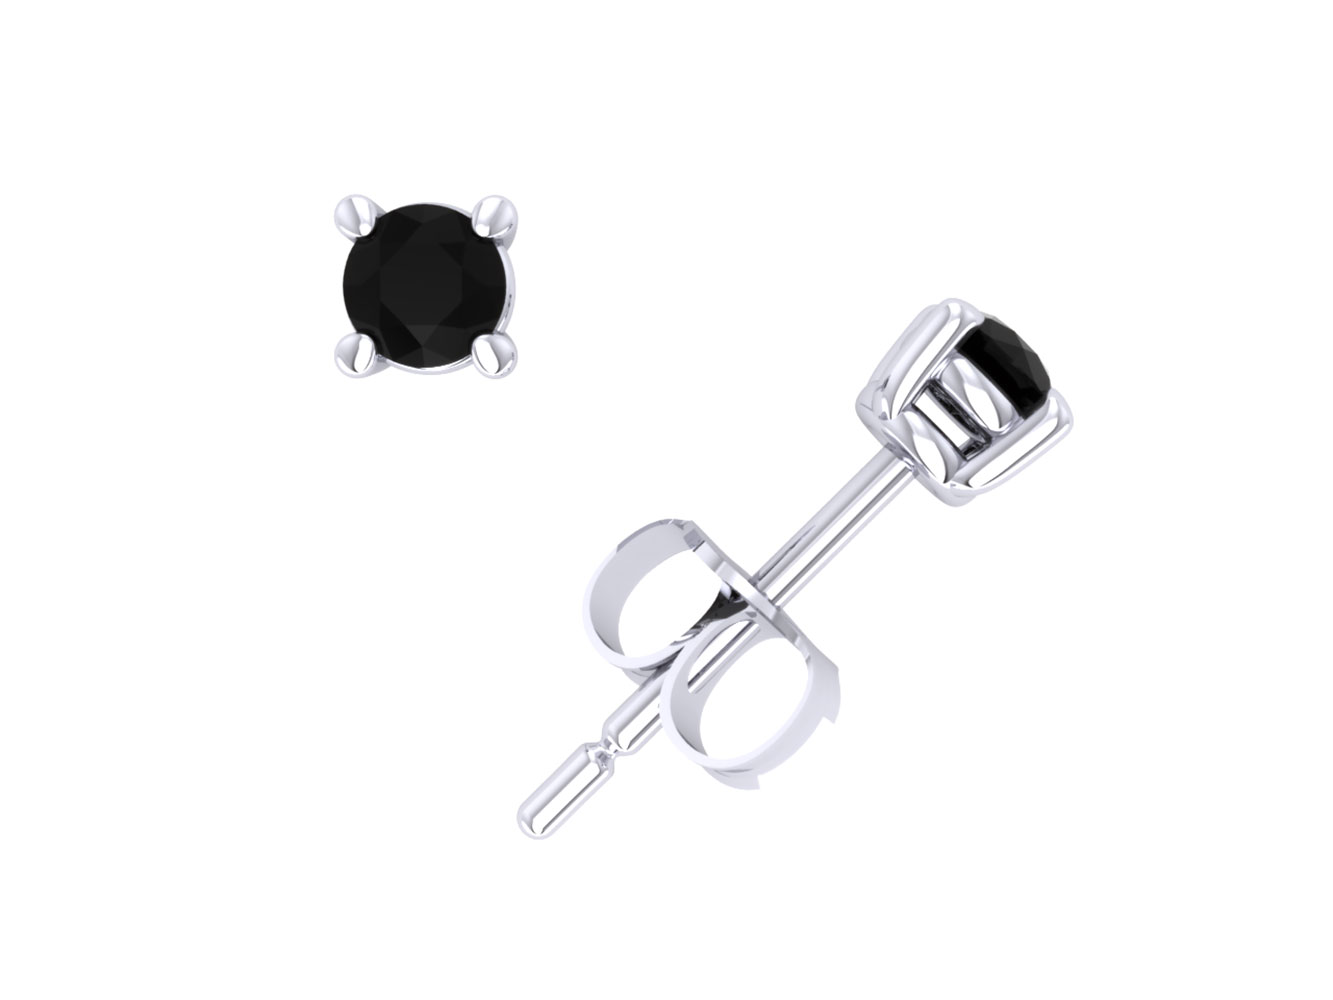 Jewel We Sell 0.2Ct Round Black Diamond Basket Stud Earrings 14k White or Yellow Gold Prong Setting AA Quality